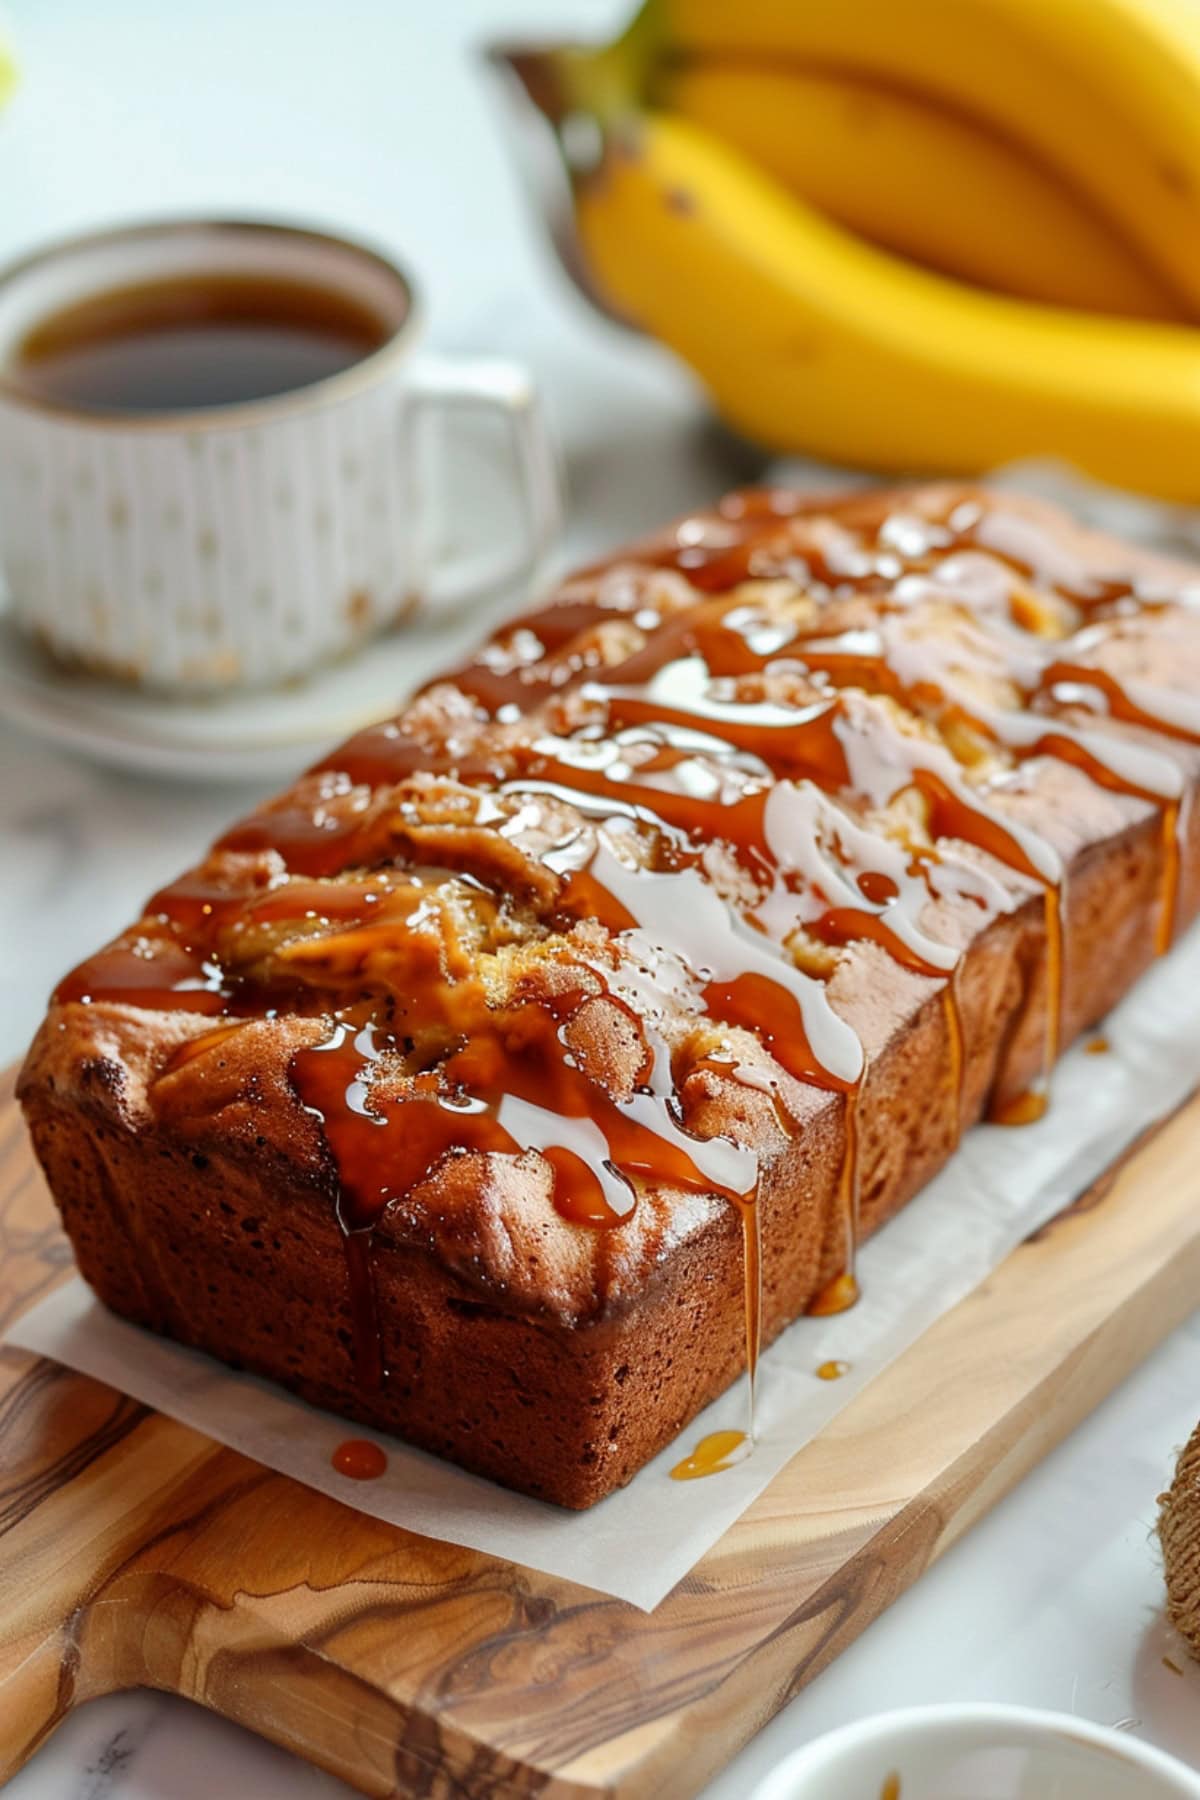 Whole Salted Caramel Banana Bread
on a wooden board drizzled with caramel.